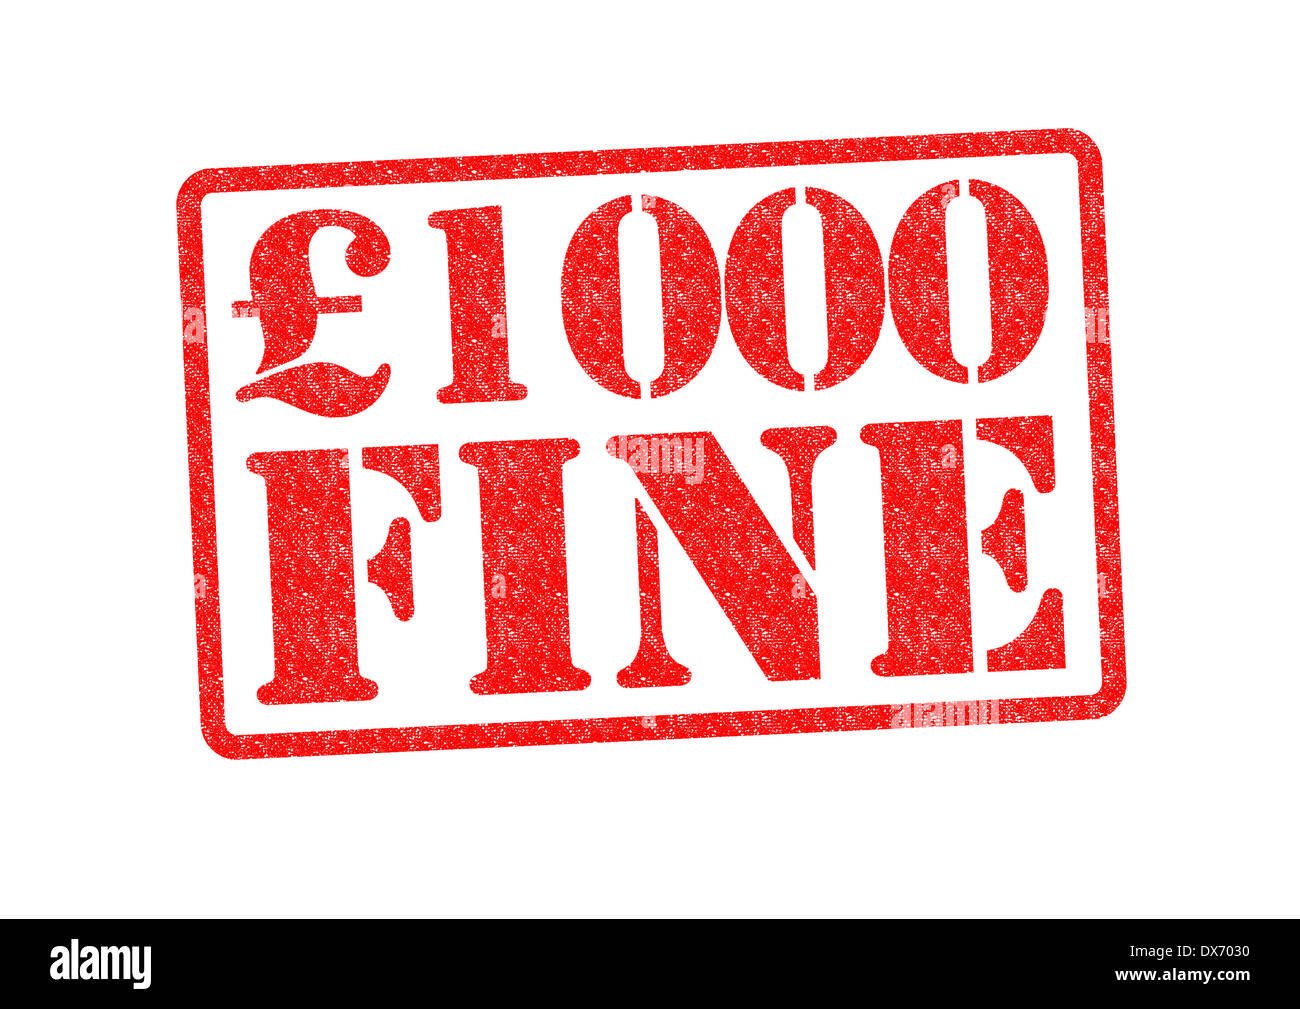 £1000 FINE Rubber Stamp over a white background. Stock Photo